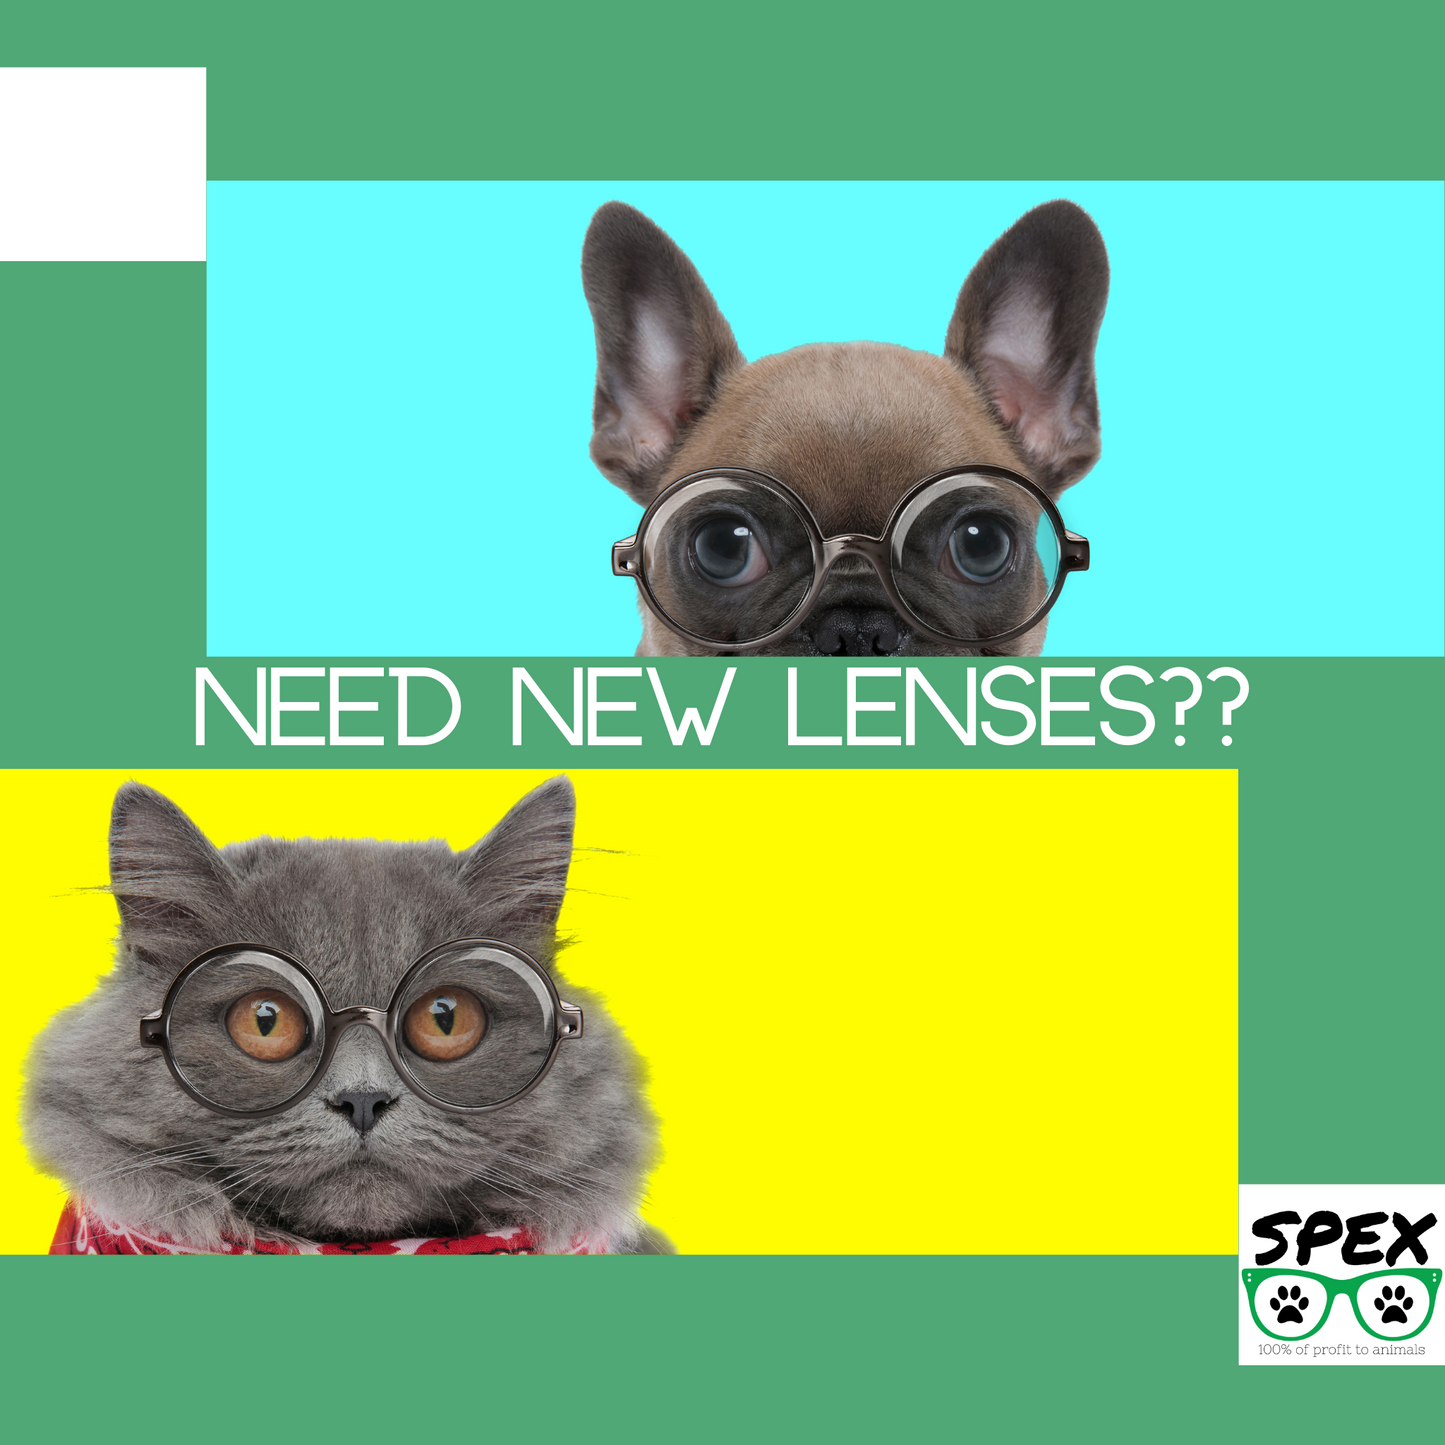 Lens Replacement in your SPEX Frame